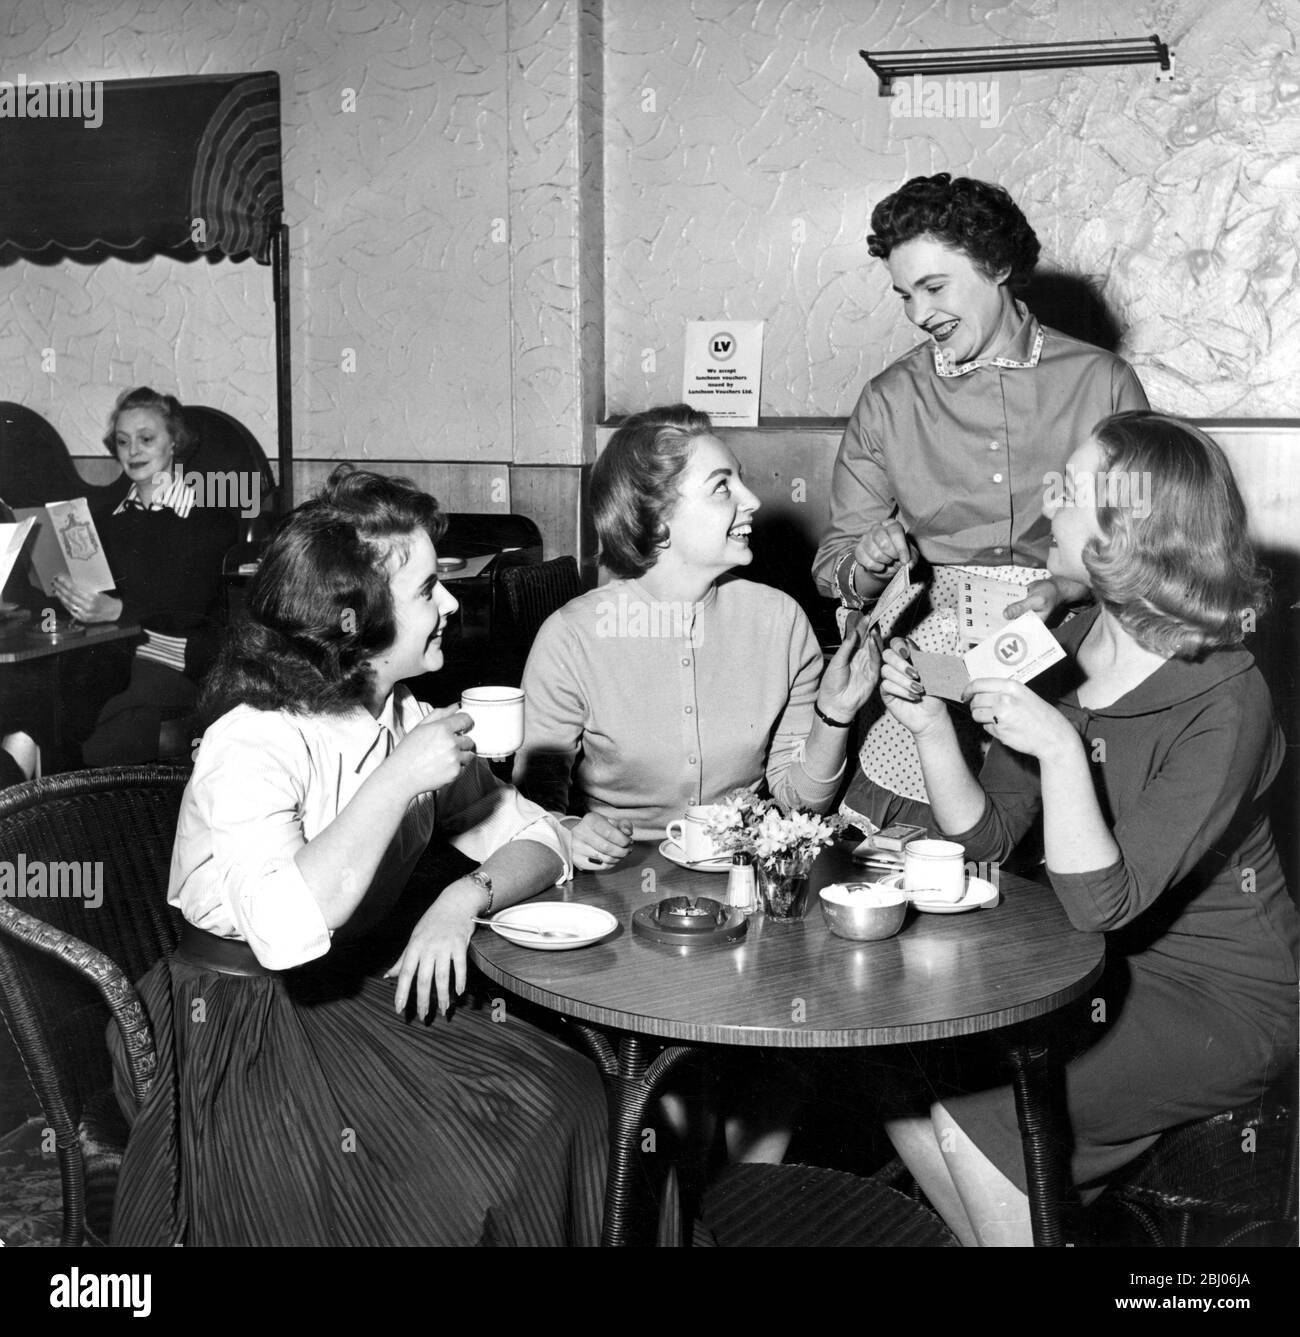 Vouchers encourage workers to eat lunch regularly, without skimping it. One doctor found that his office staff spent lunch money on records and nylons - picture shows after lunch at the S & R grill in Denman Street - girls pay for their meal with luncheon vouchers. 1957 Stock Photo